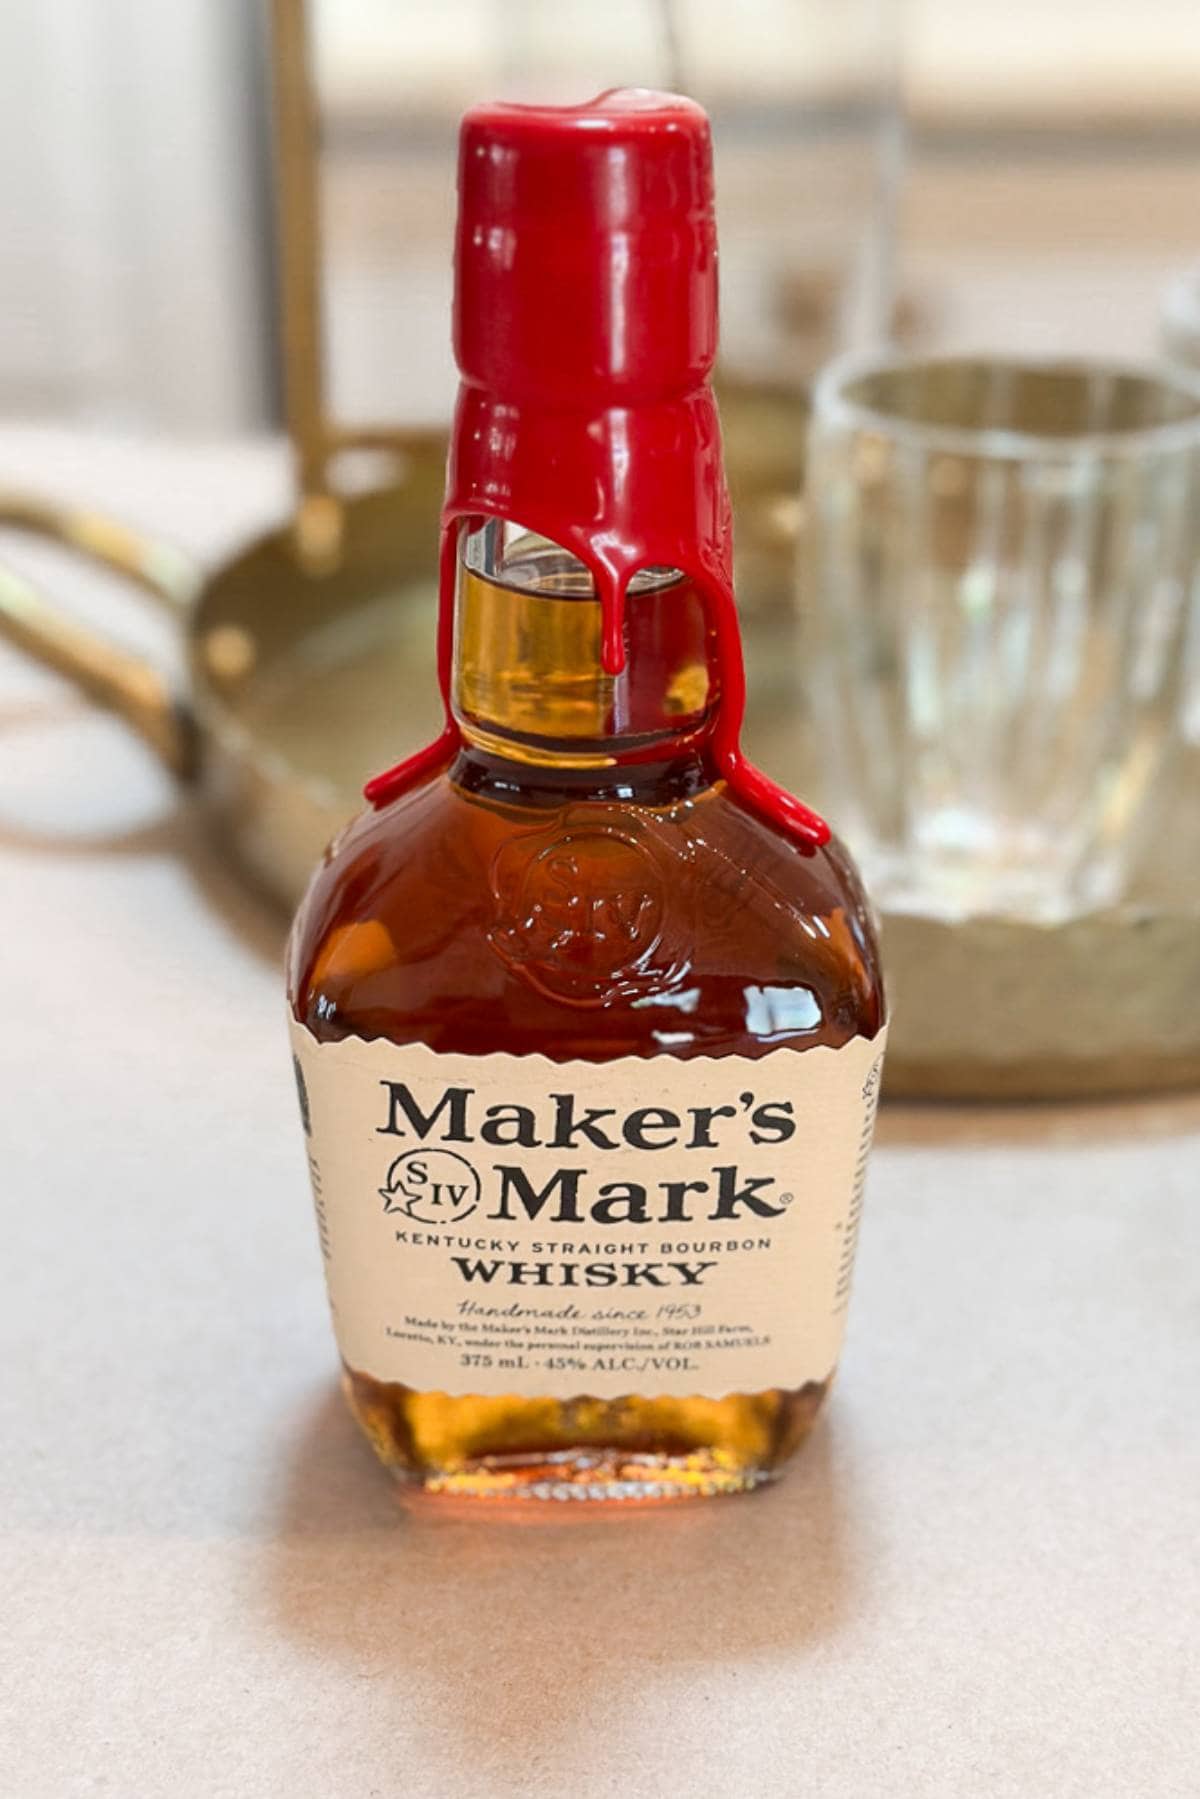 Maker's Mark to make a smoked Old Fashioned cocktail.